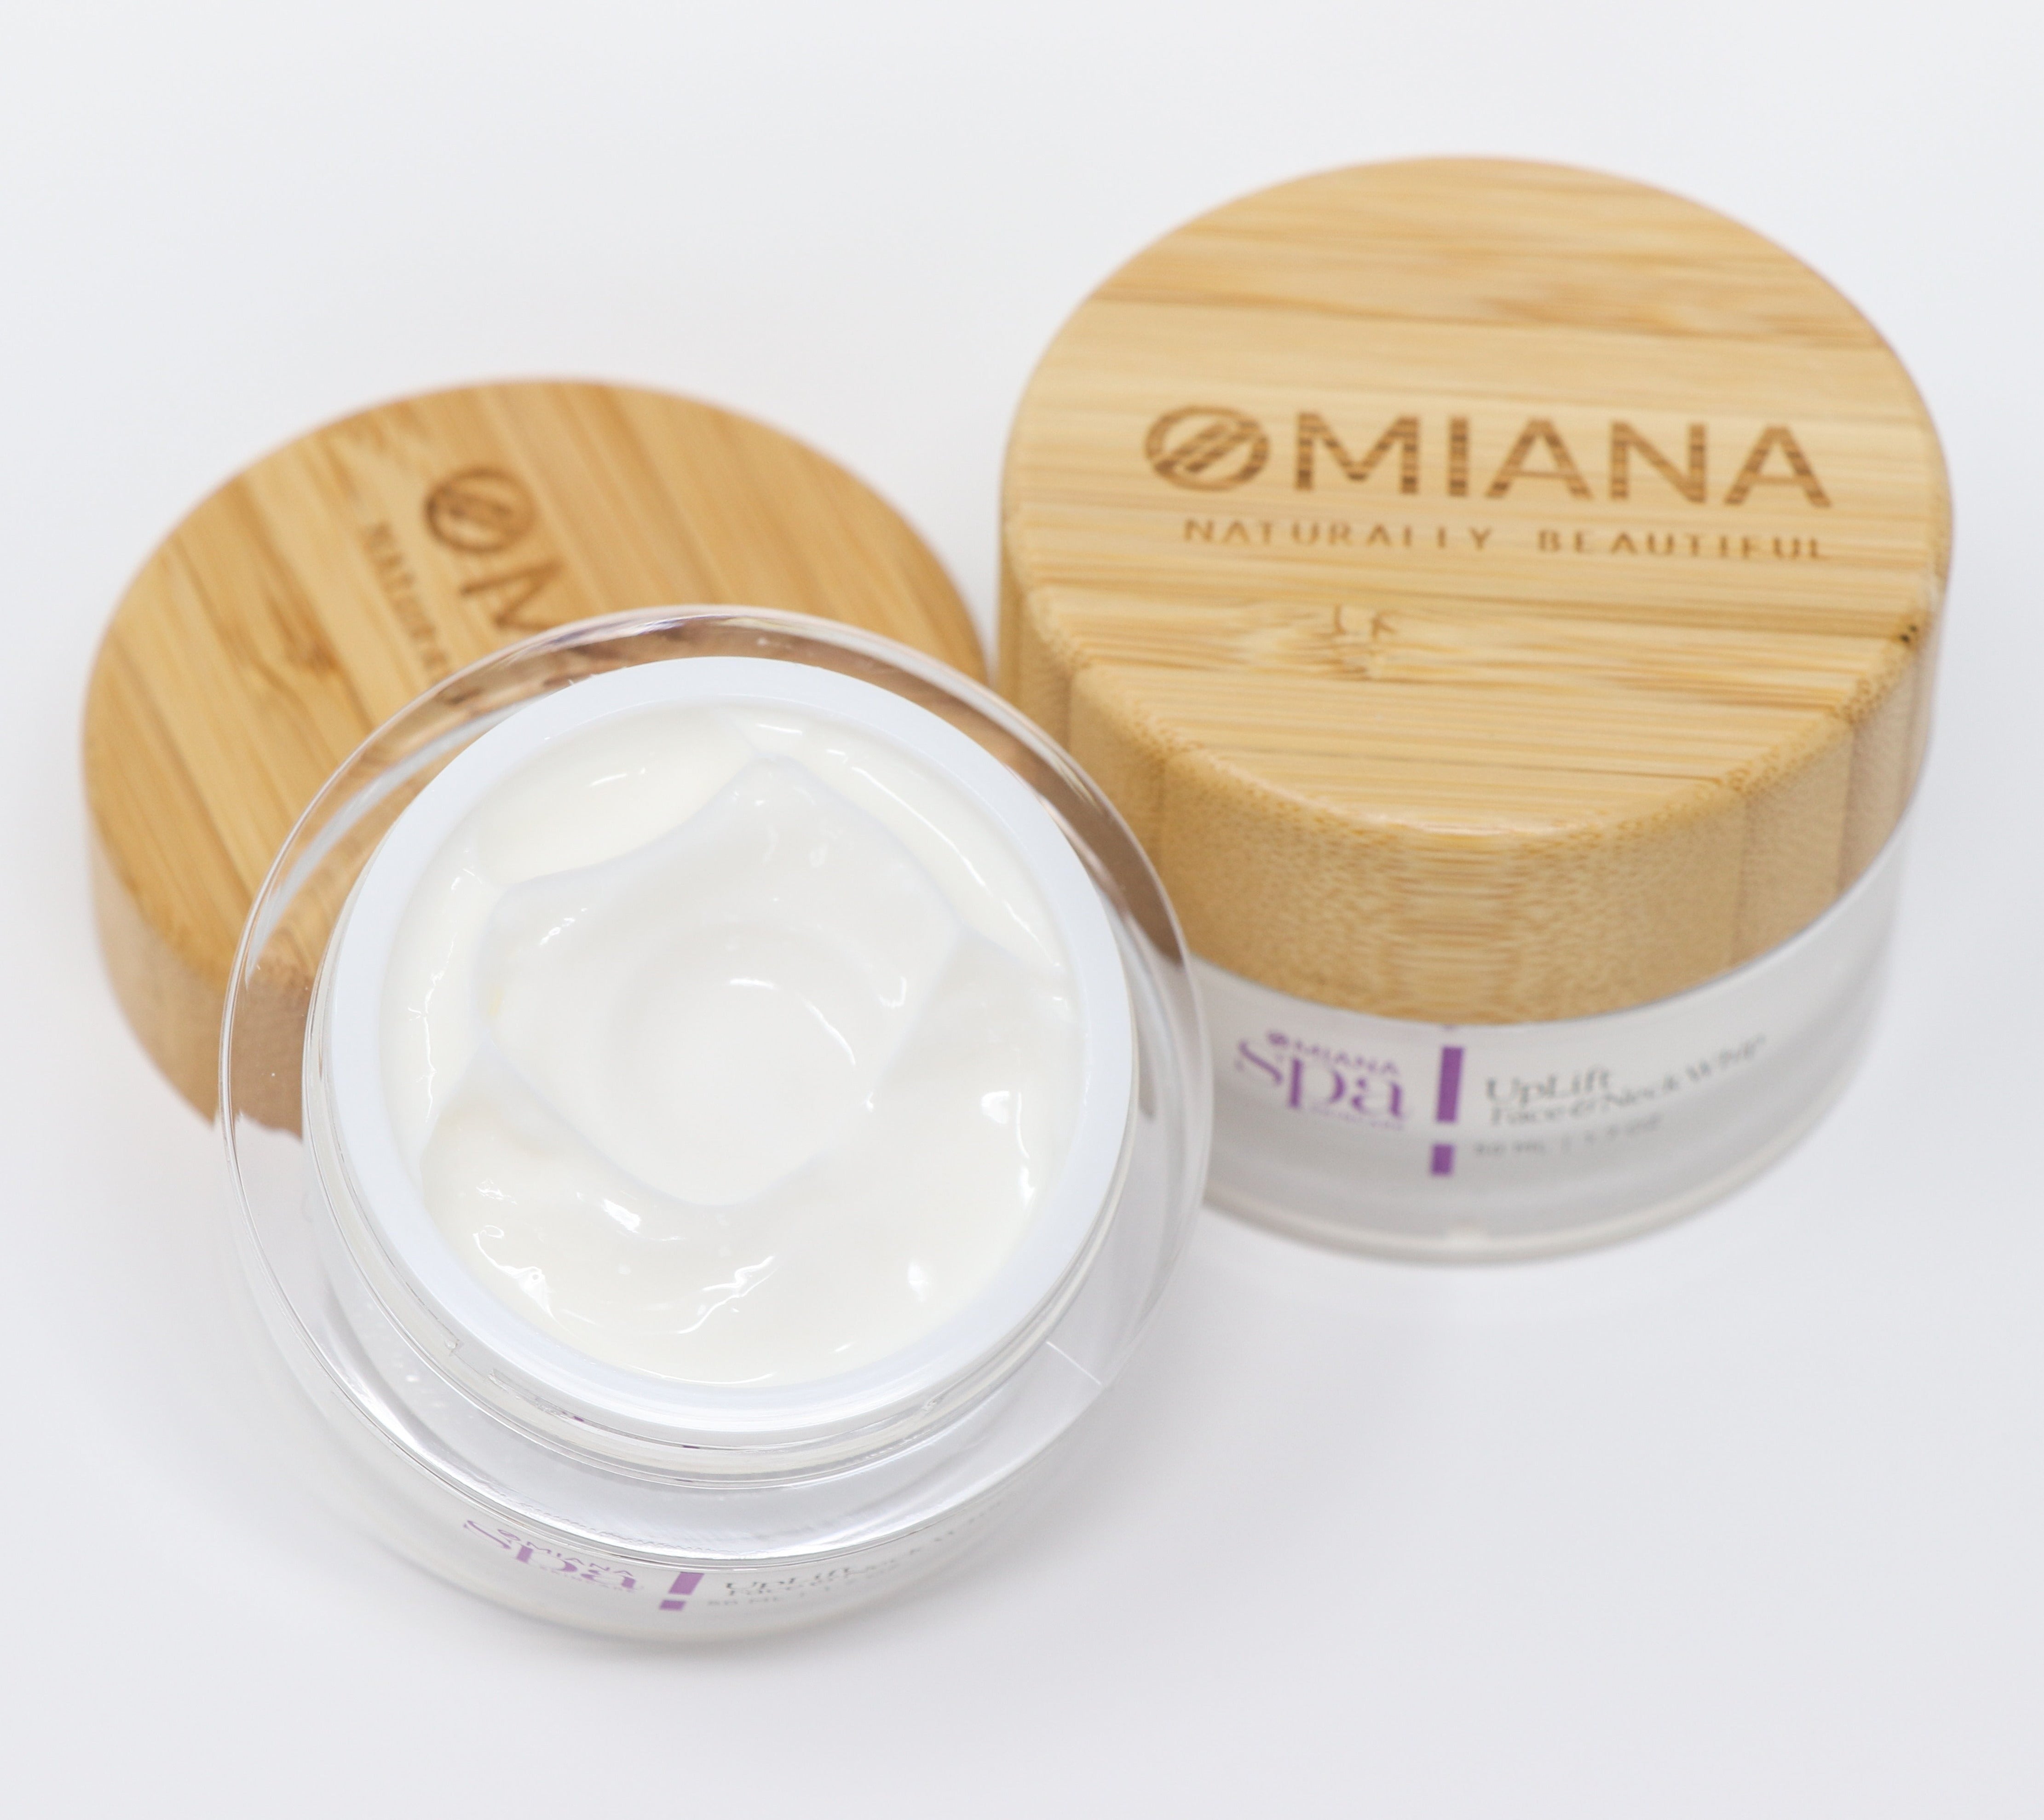 UpLift Face & Neck Whip - 100% Free From GMOs, Toxins, Artificial Fragrances, & More by Omiana